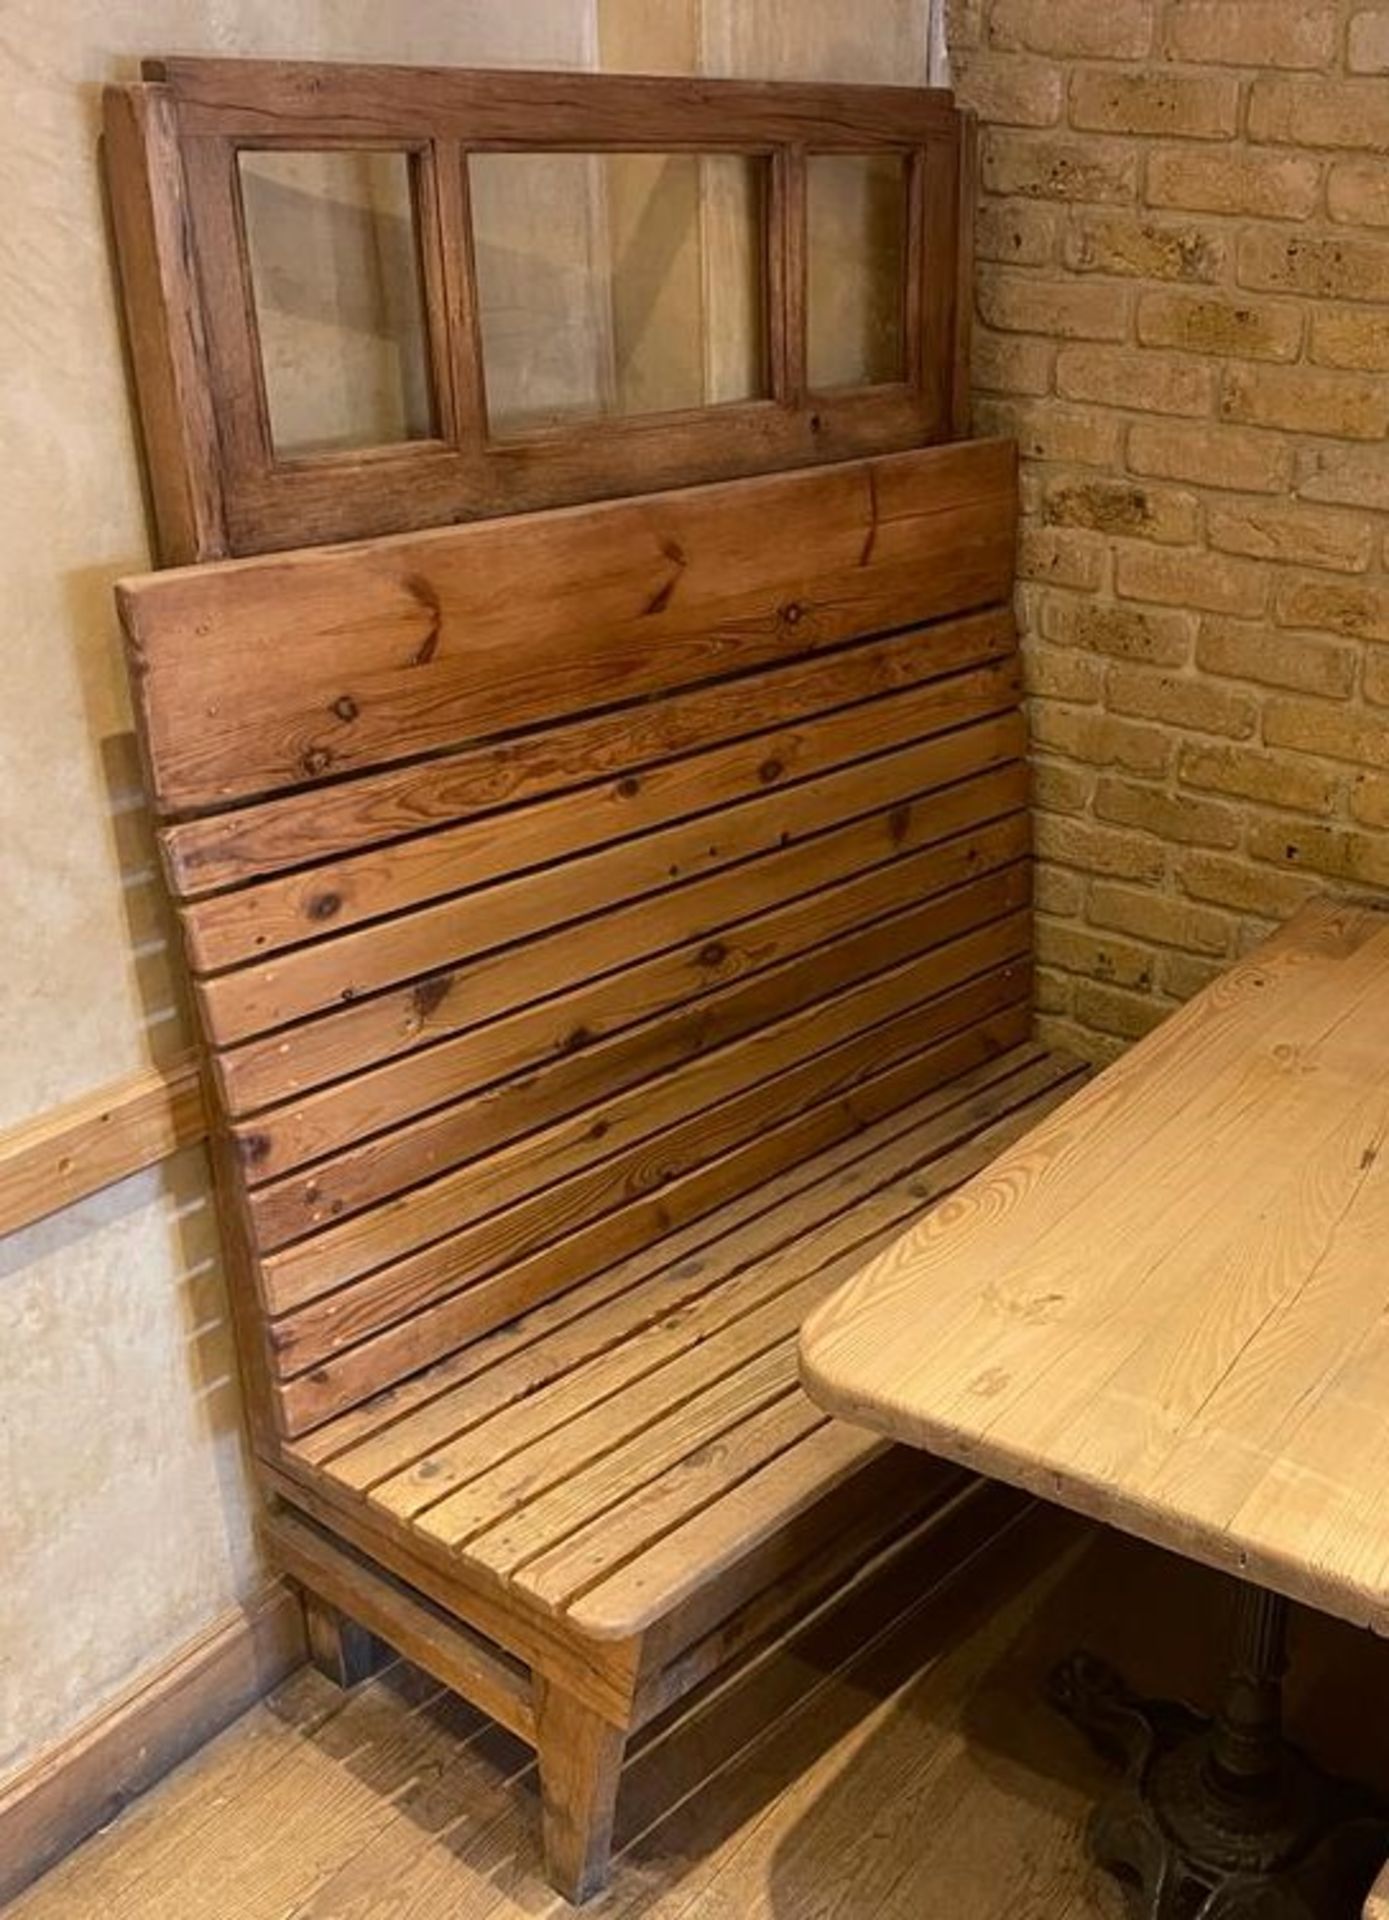 1 x Rustic Restaurant Seating Bench With Top Glass Partition